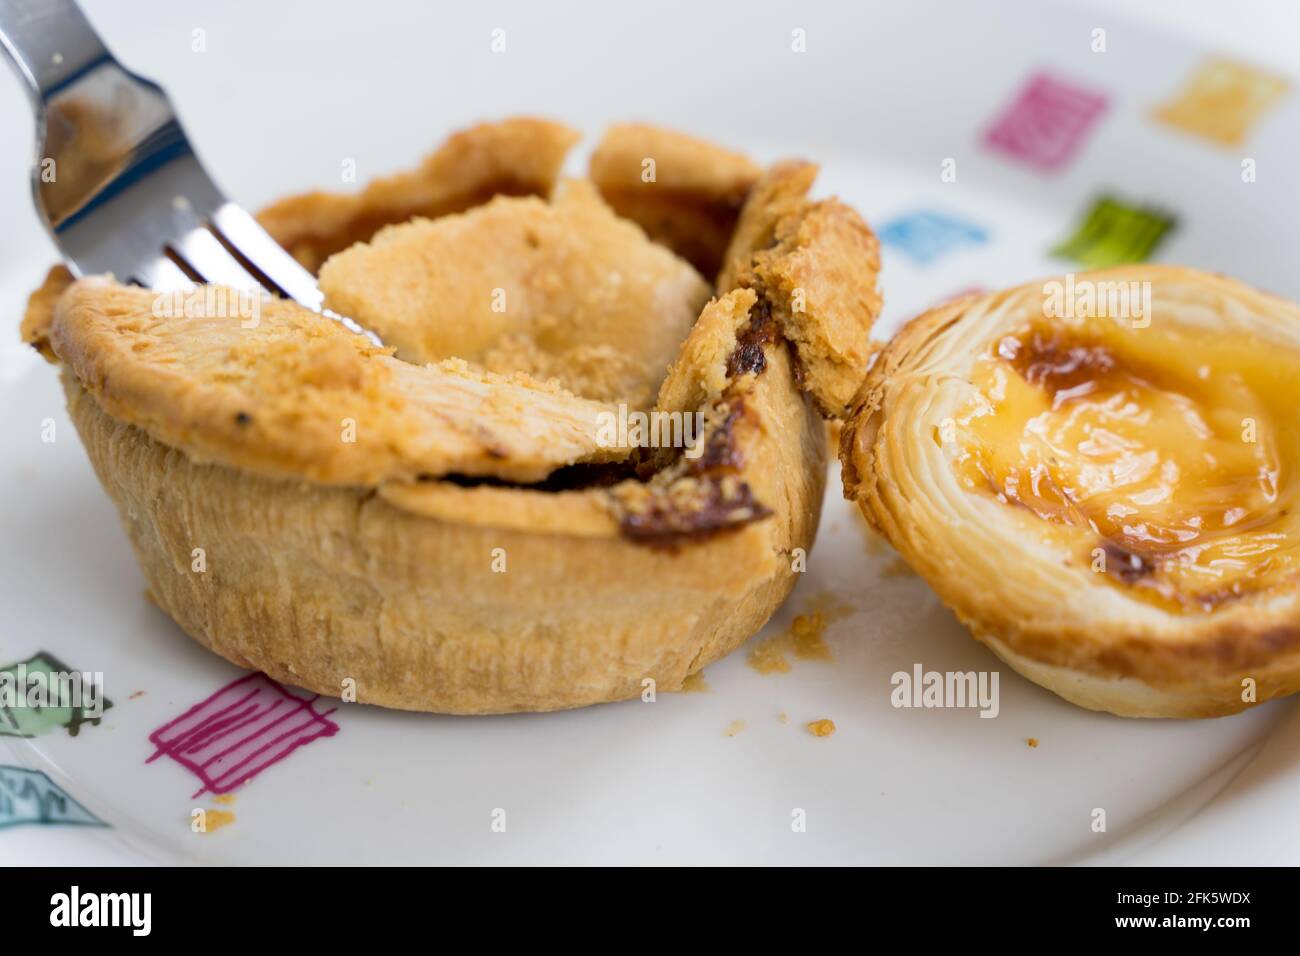 a Fork tuck into Chicken pie with egg tart as side dish, UK, Stock Photo